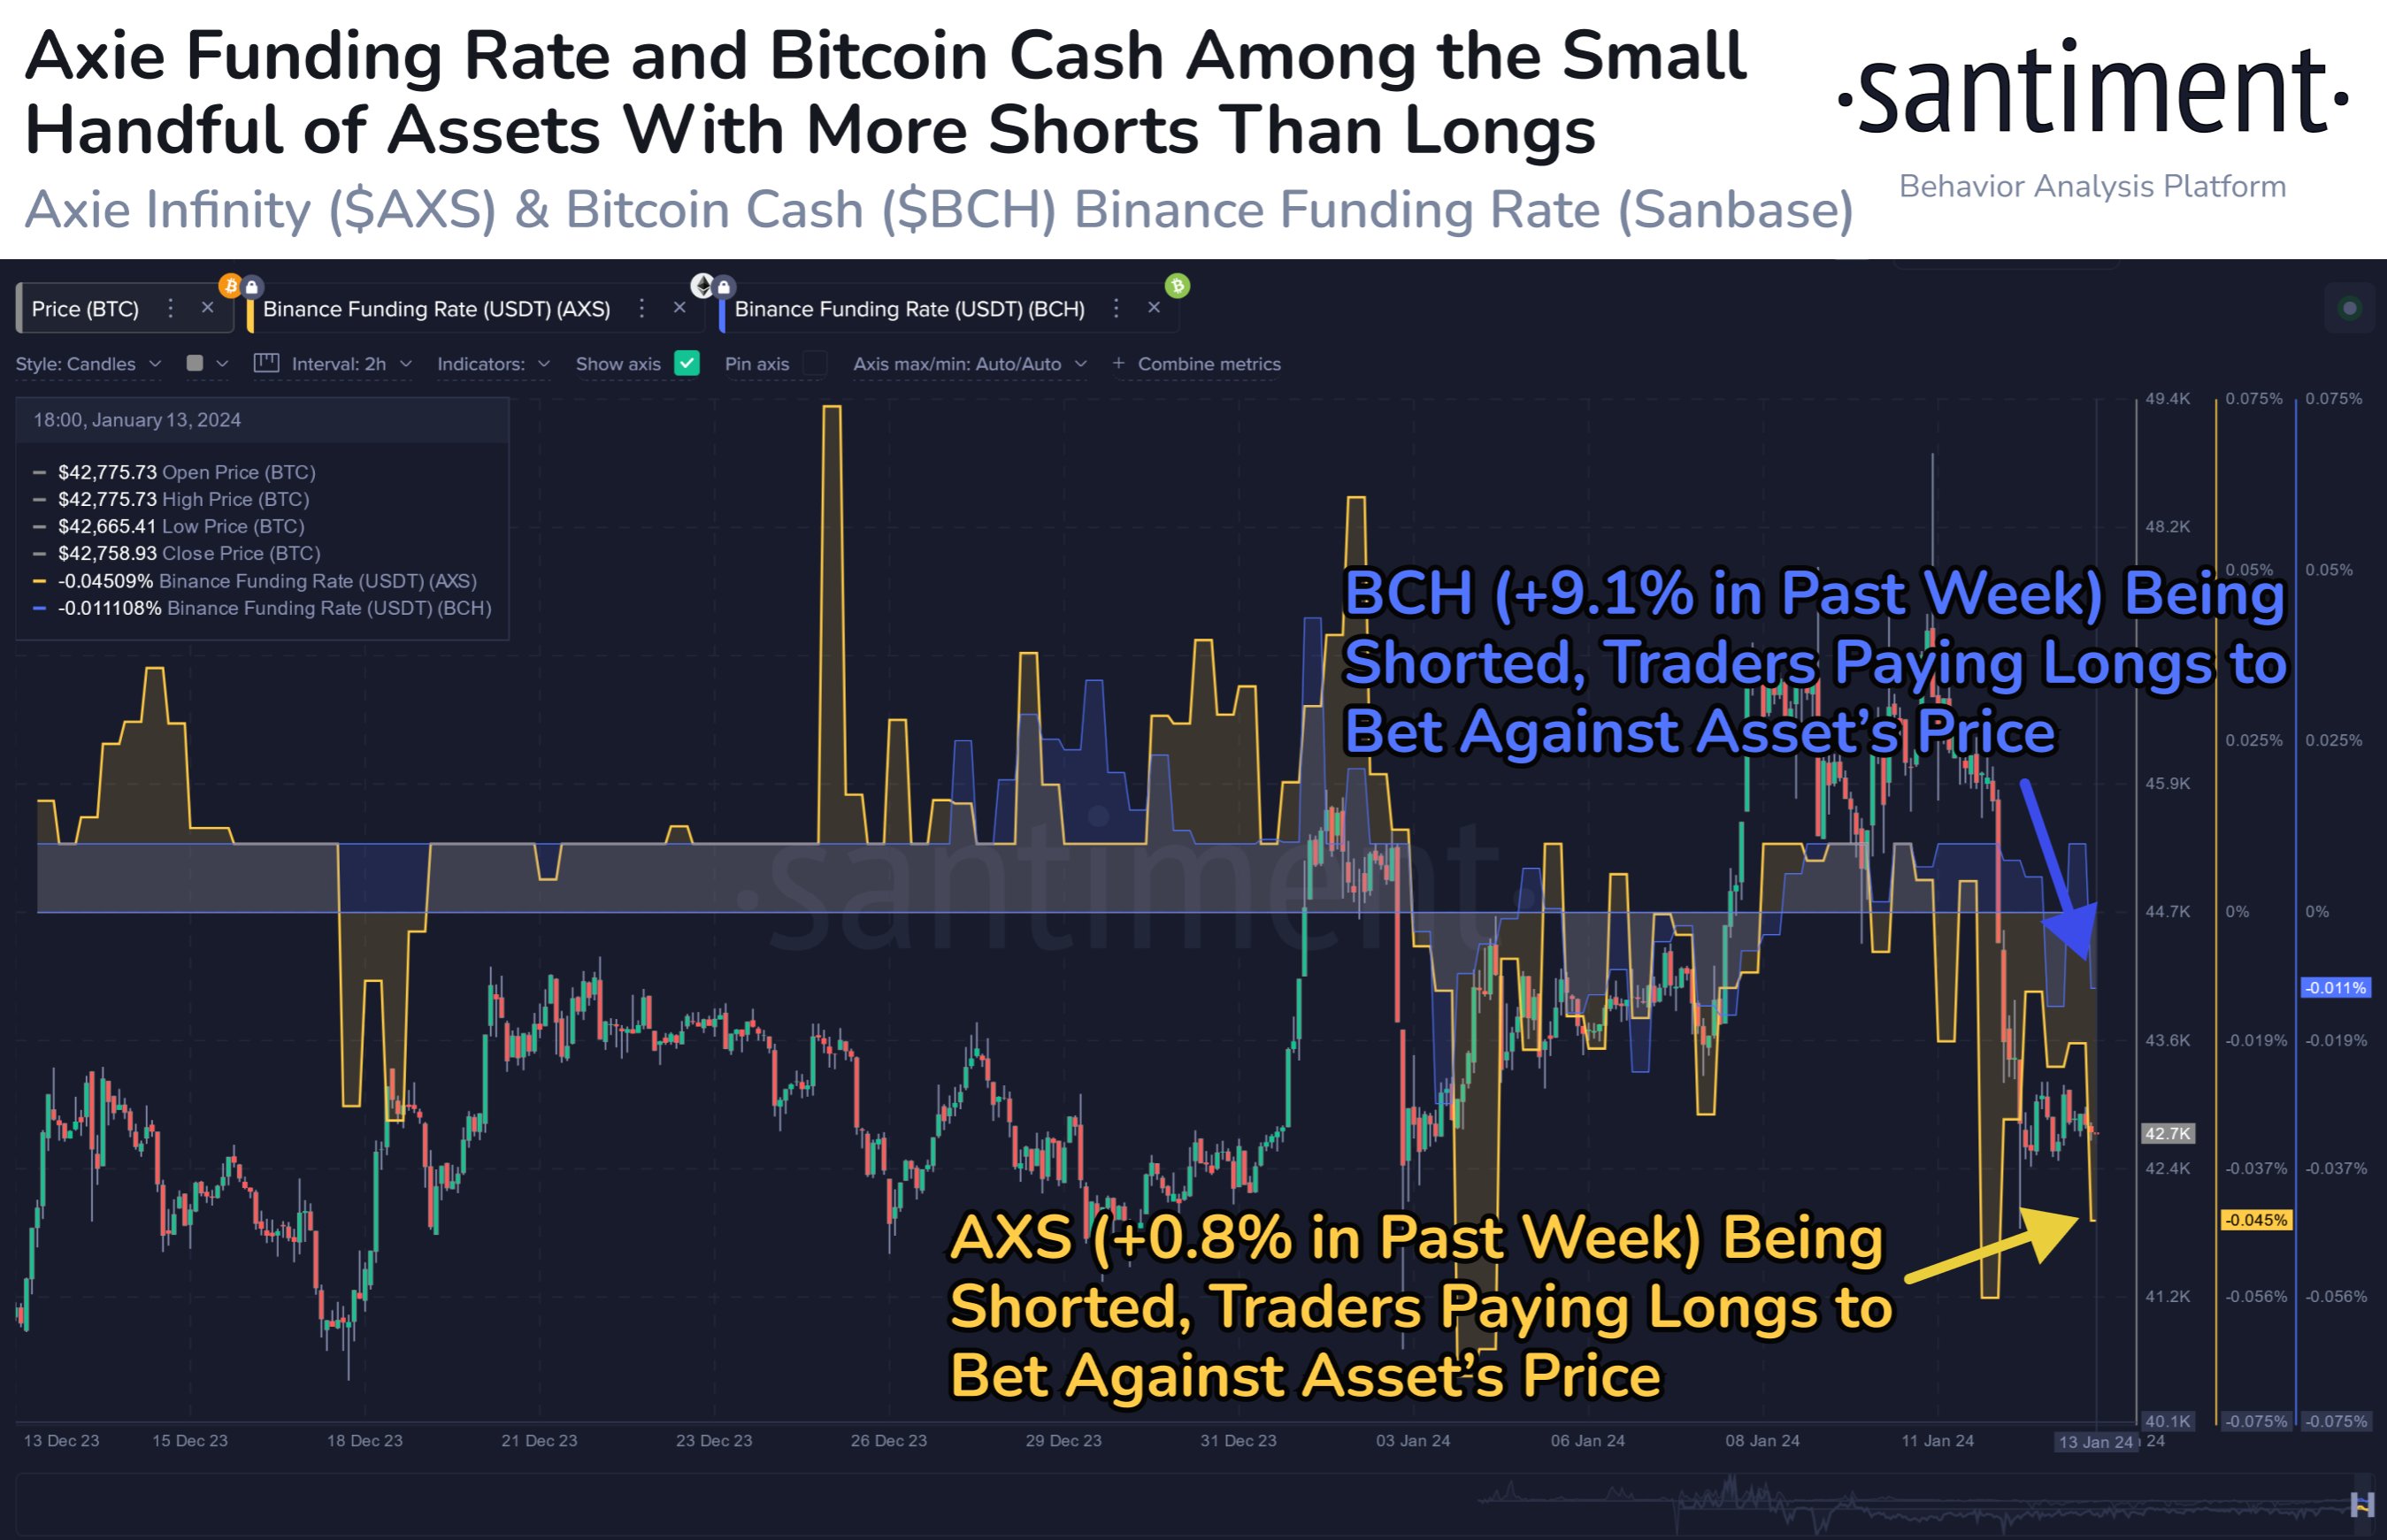 AXS and BCH